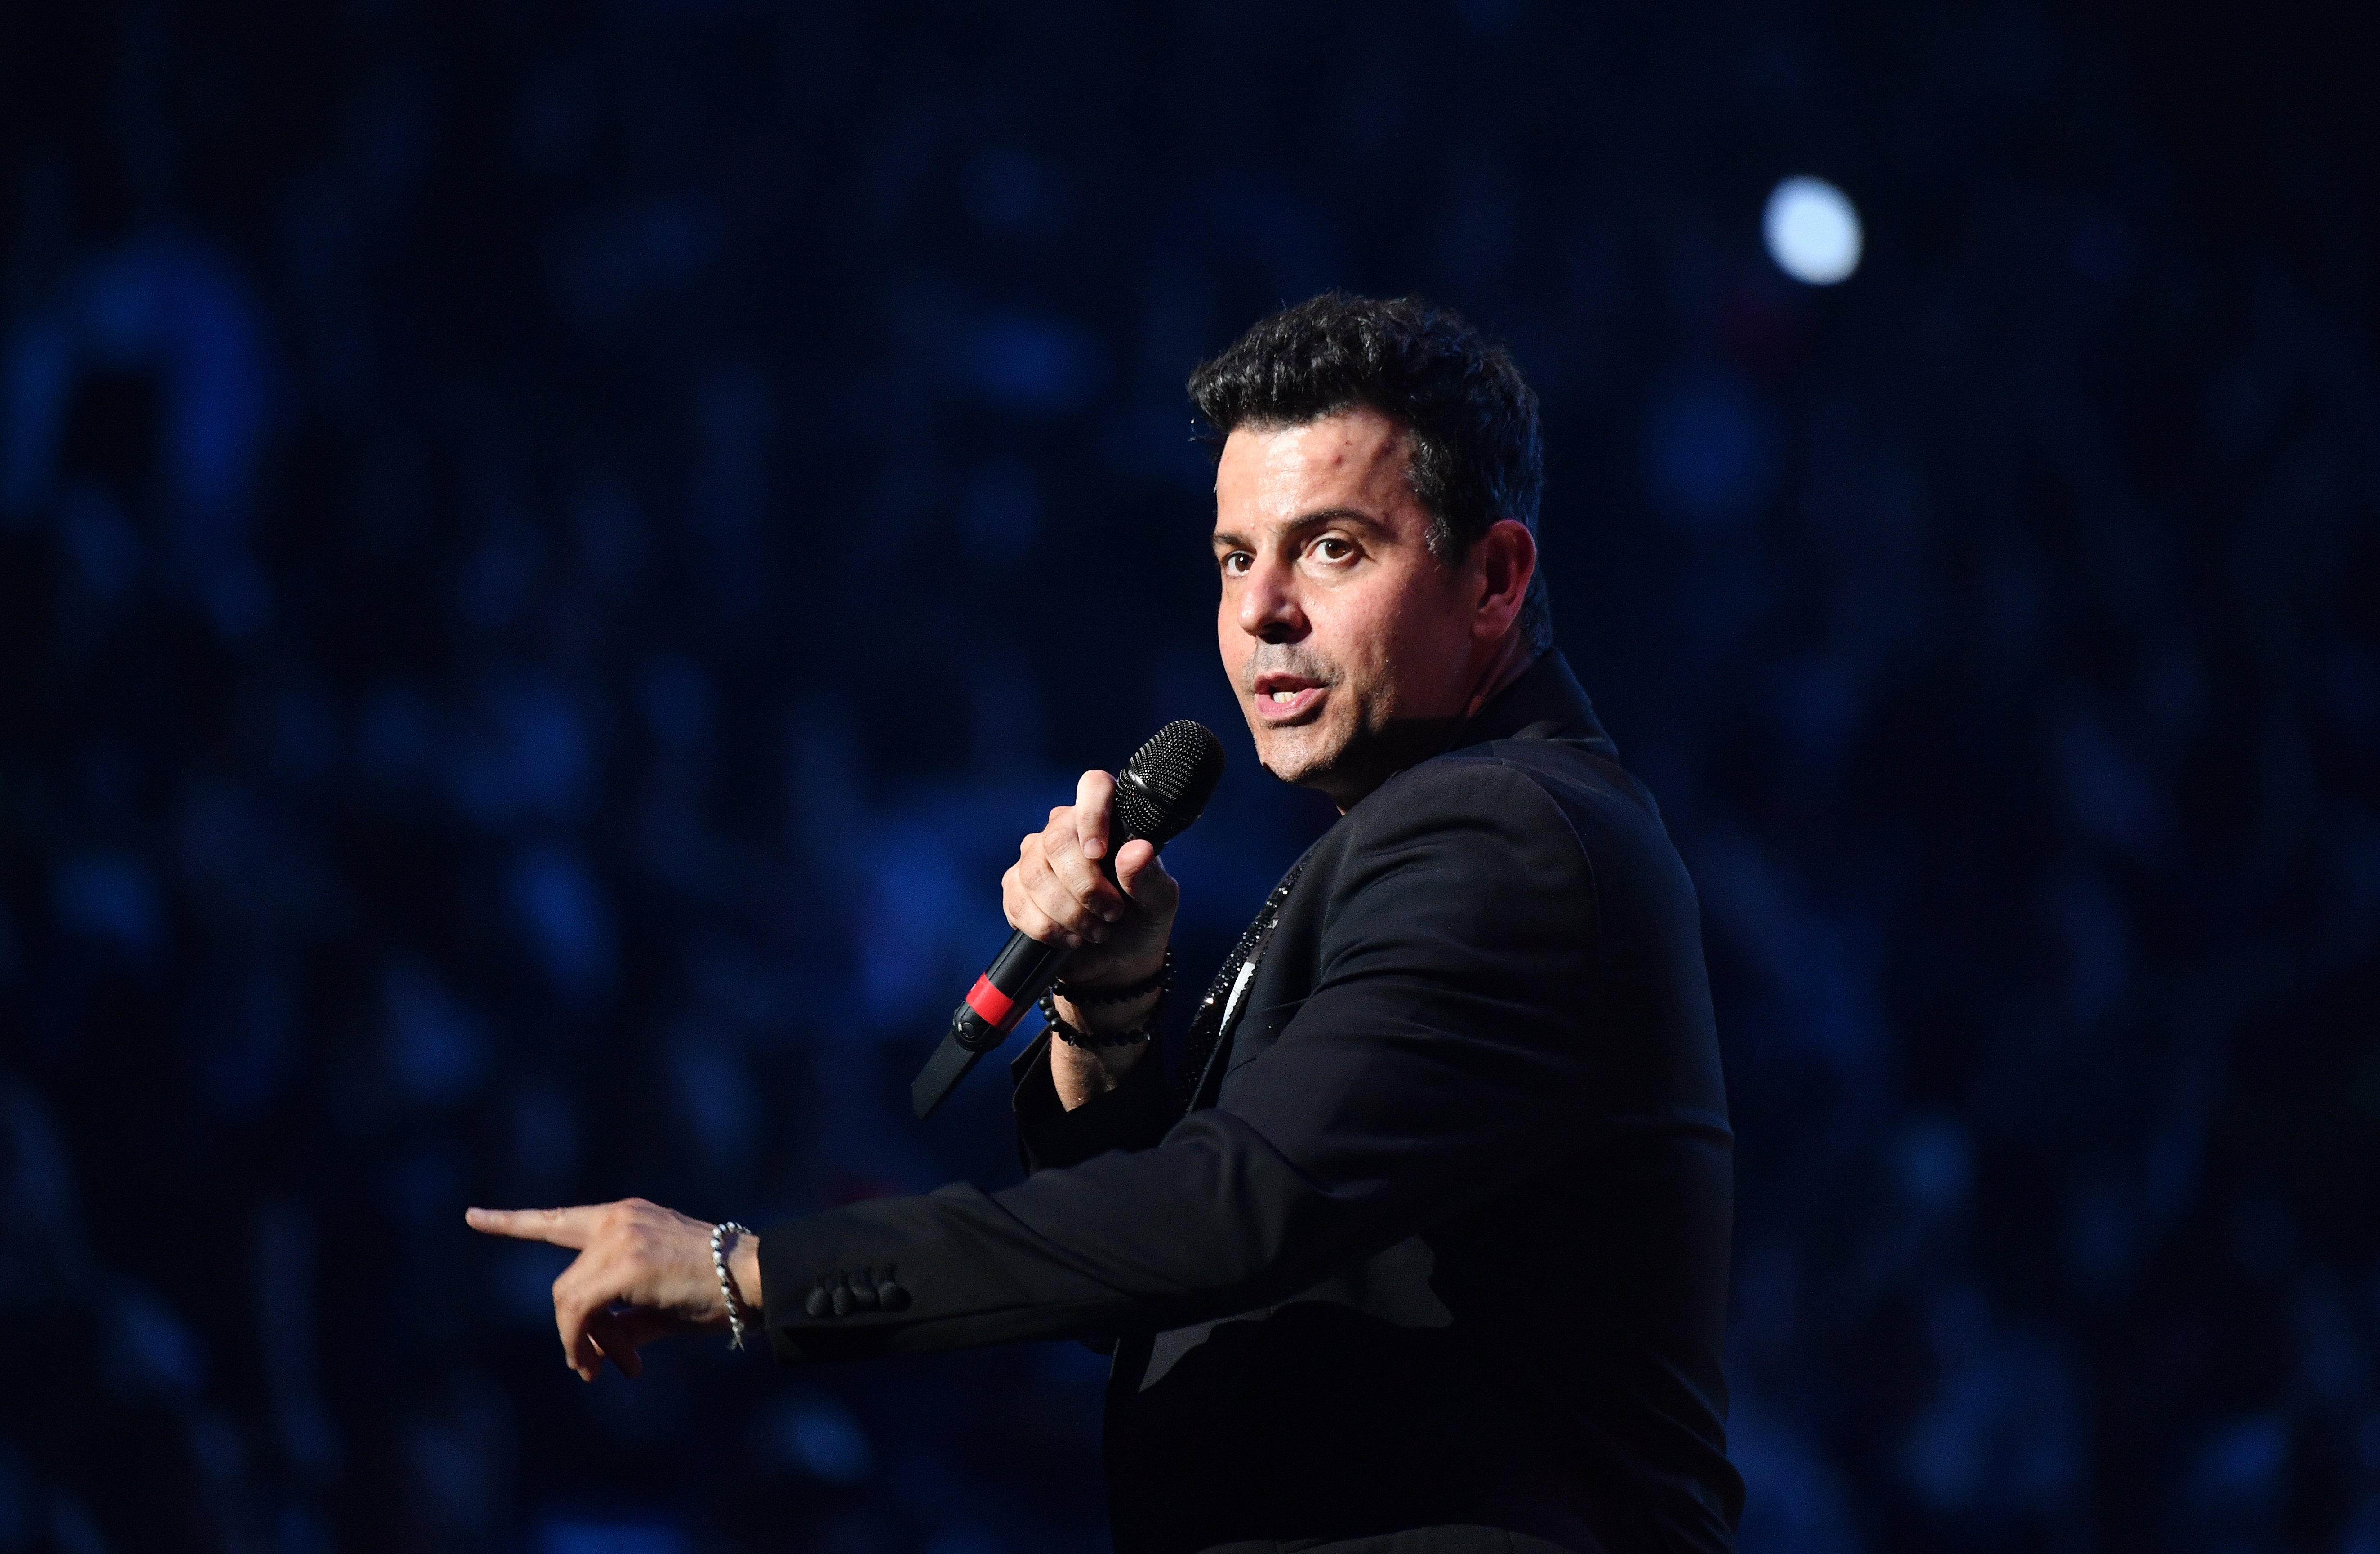 Jordan Knight at State Farm Arena on July 7, 2022, in Atlanta, Georgia. | Source: Getty Images